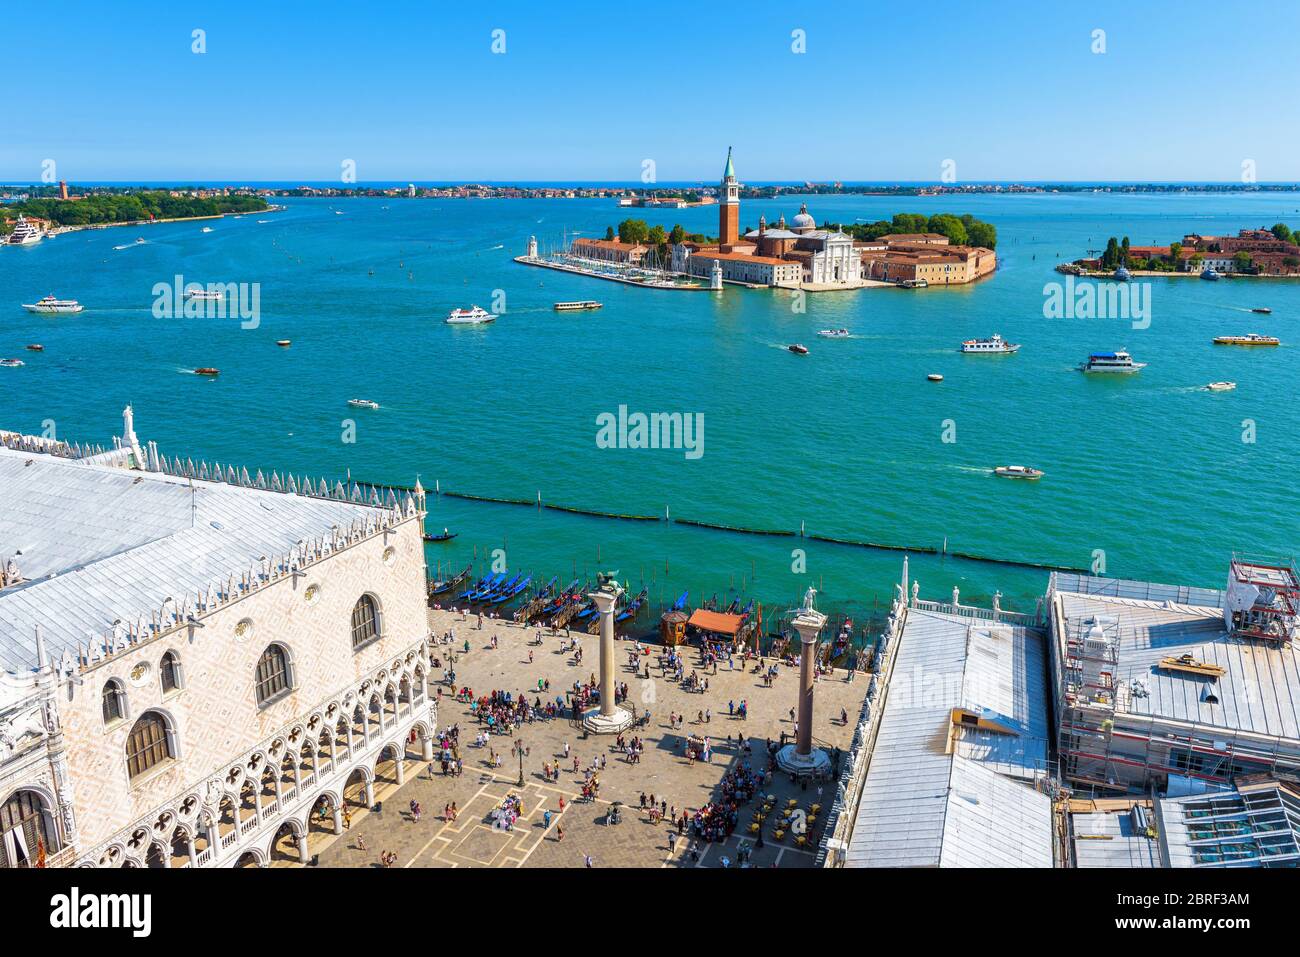 Aerial view of Venice, Italy. Piazza San Marco, or St Mark`s Square, Doge's Palace and embankment. Island of San Giorgio Maggiore in the lagoon of Ven Stock Photo